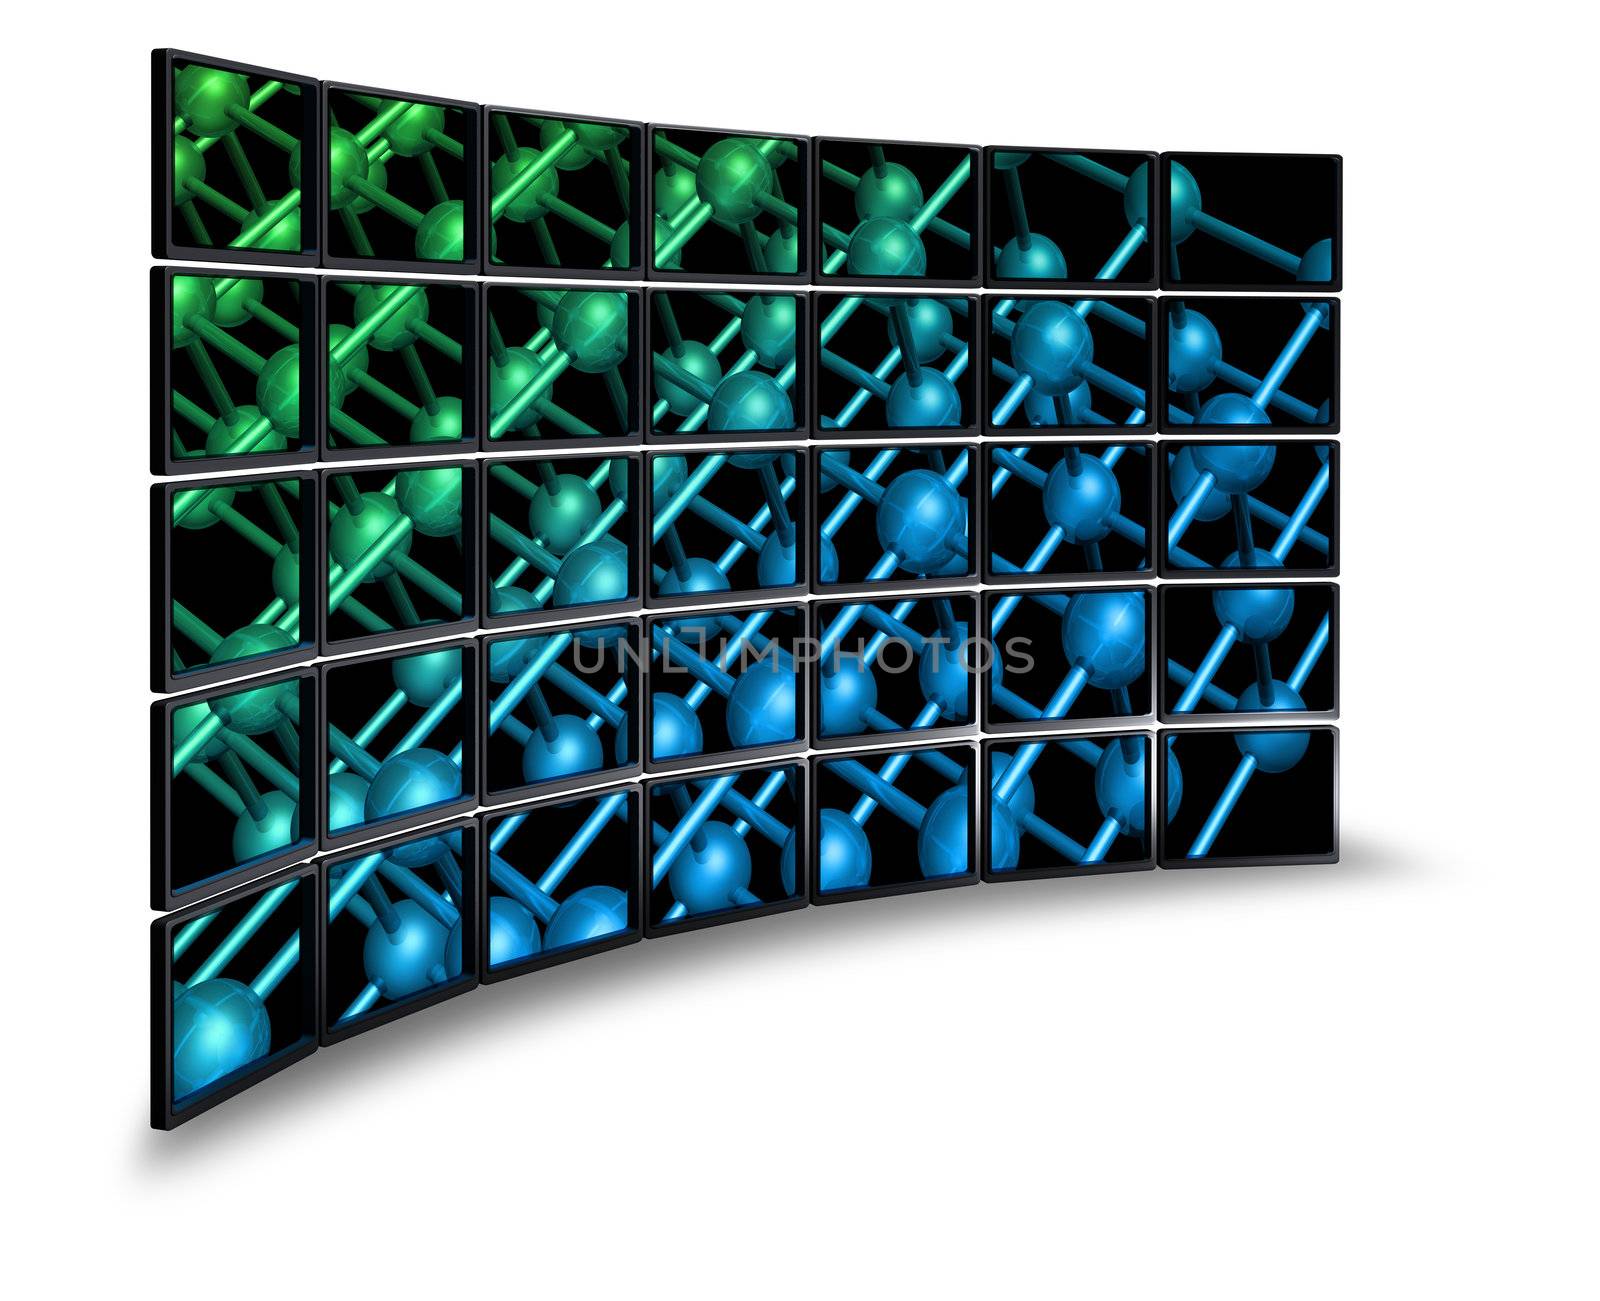 Multimedia wide screen monitor wall with nanoparticle image